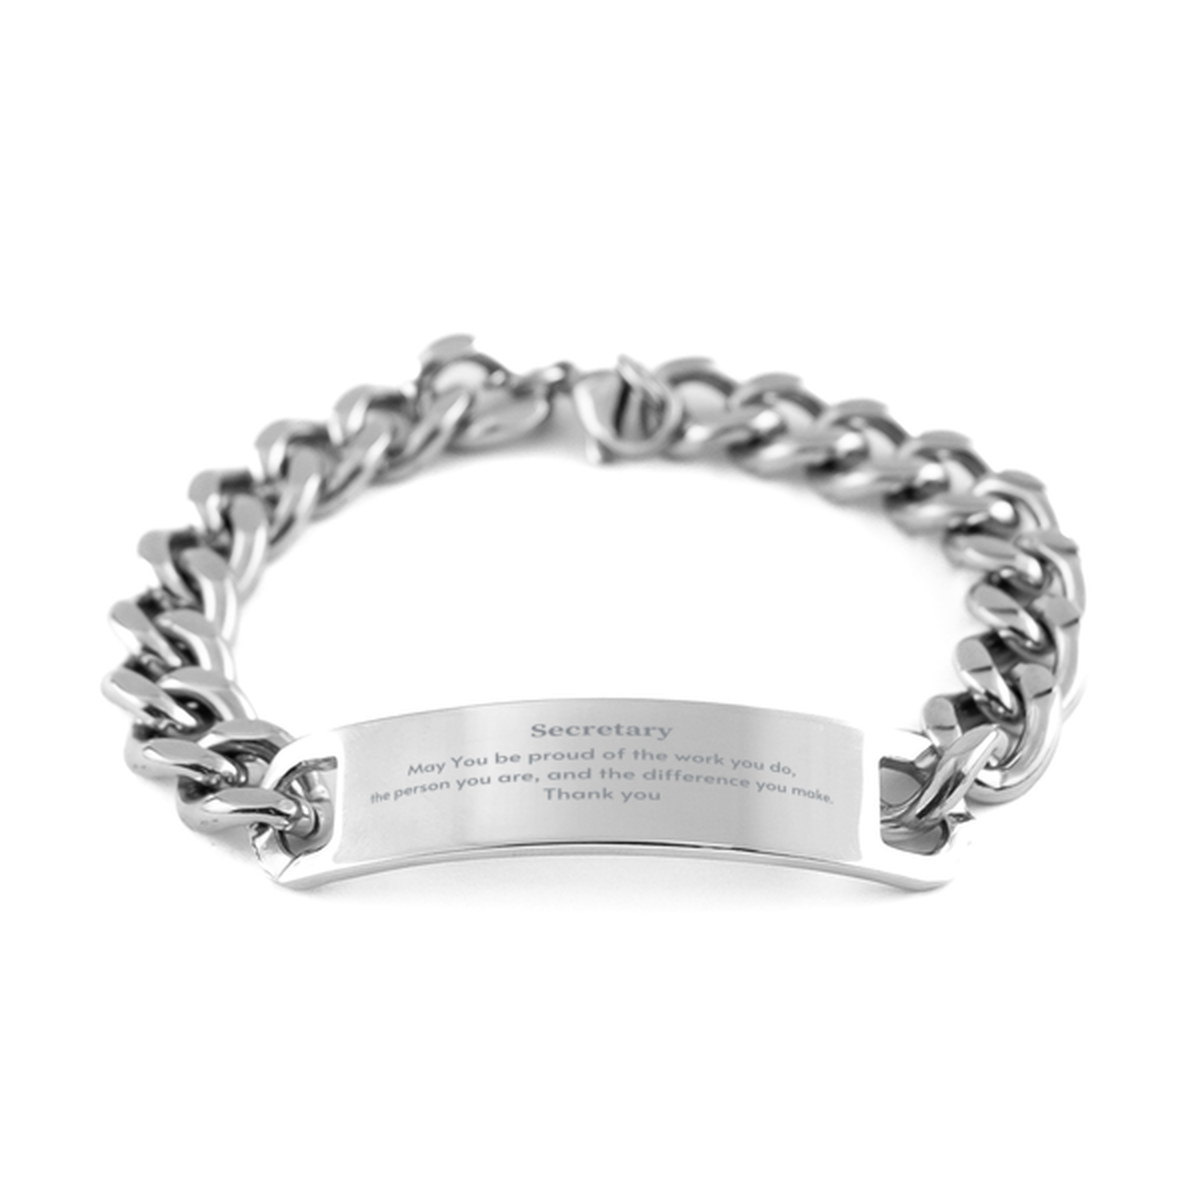 Heartwarming Cuban Chain Stainless Steel Bracelet Retirement Coworkers Gifts for Secretary, Secretary May You be proud of the work you do, the person you are Gifts for Boss Men Women Friends